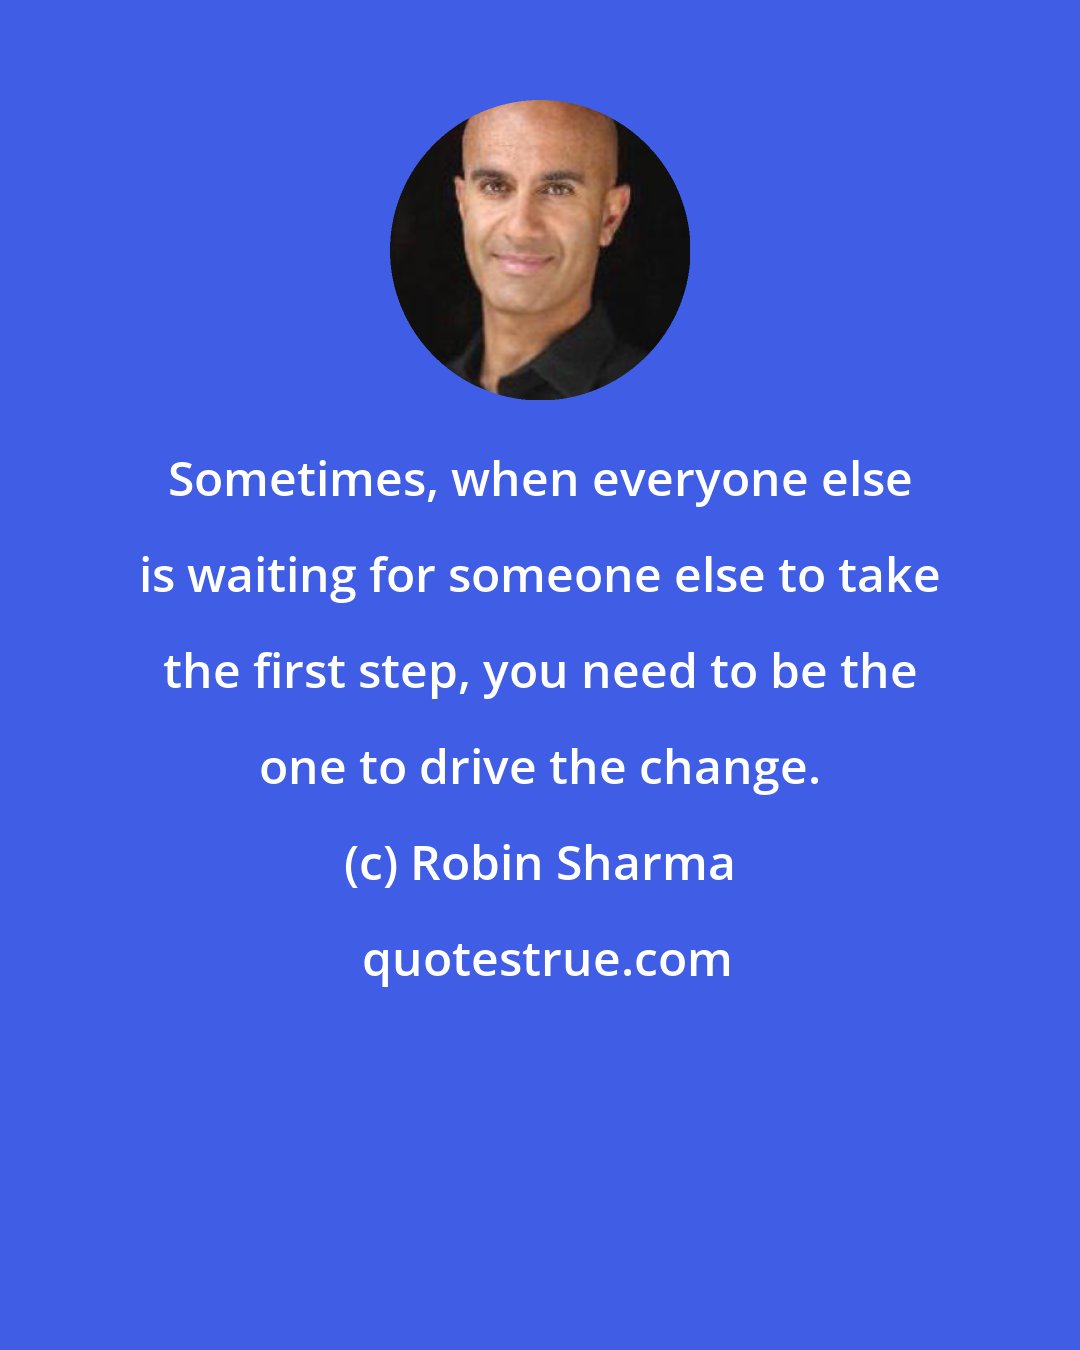 Robin Sharma: Sometimes, when everyone else is waiting for someone else to take the first step, you need to be the one to drive the change.